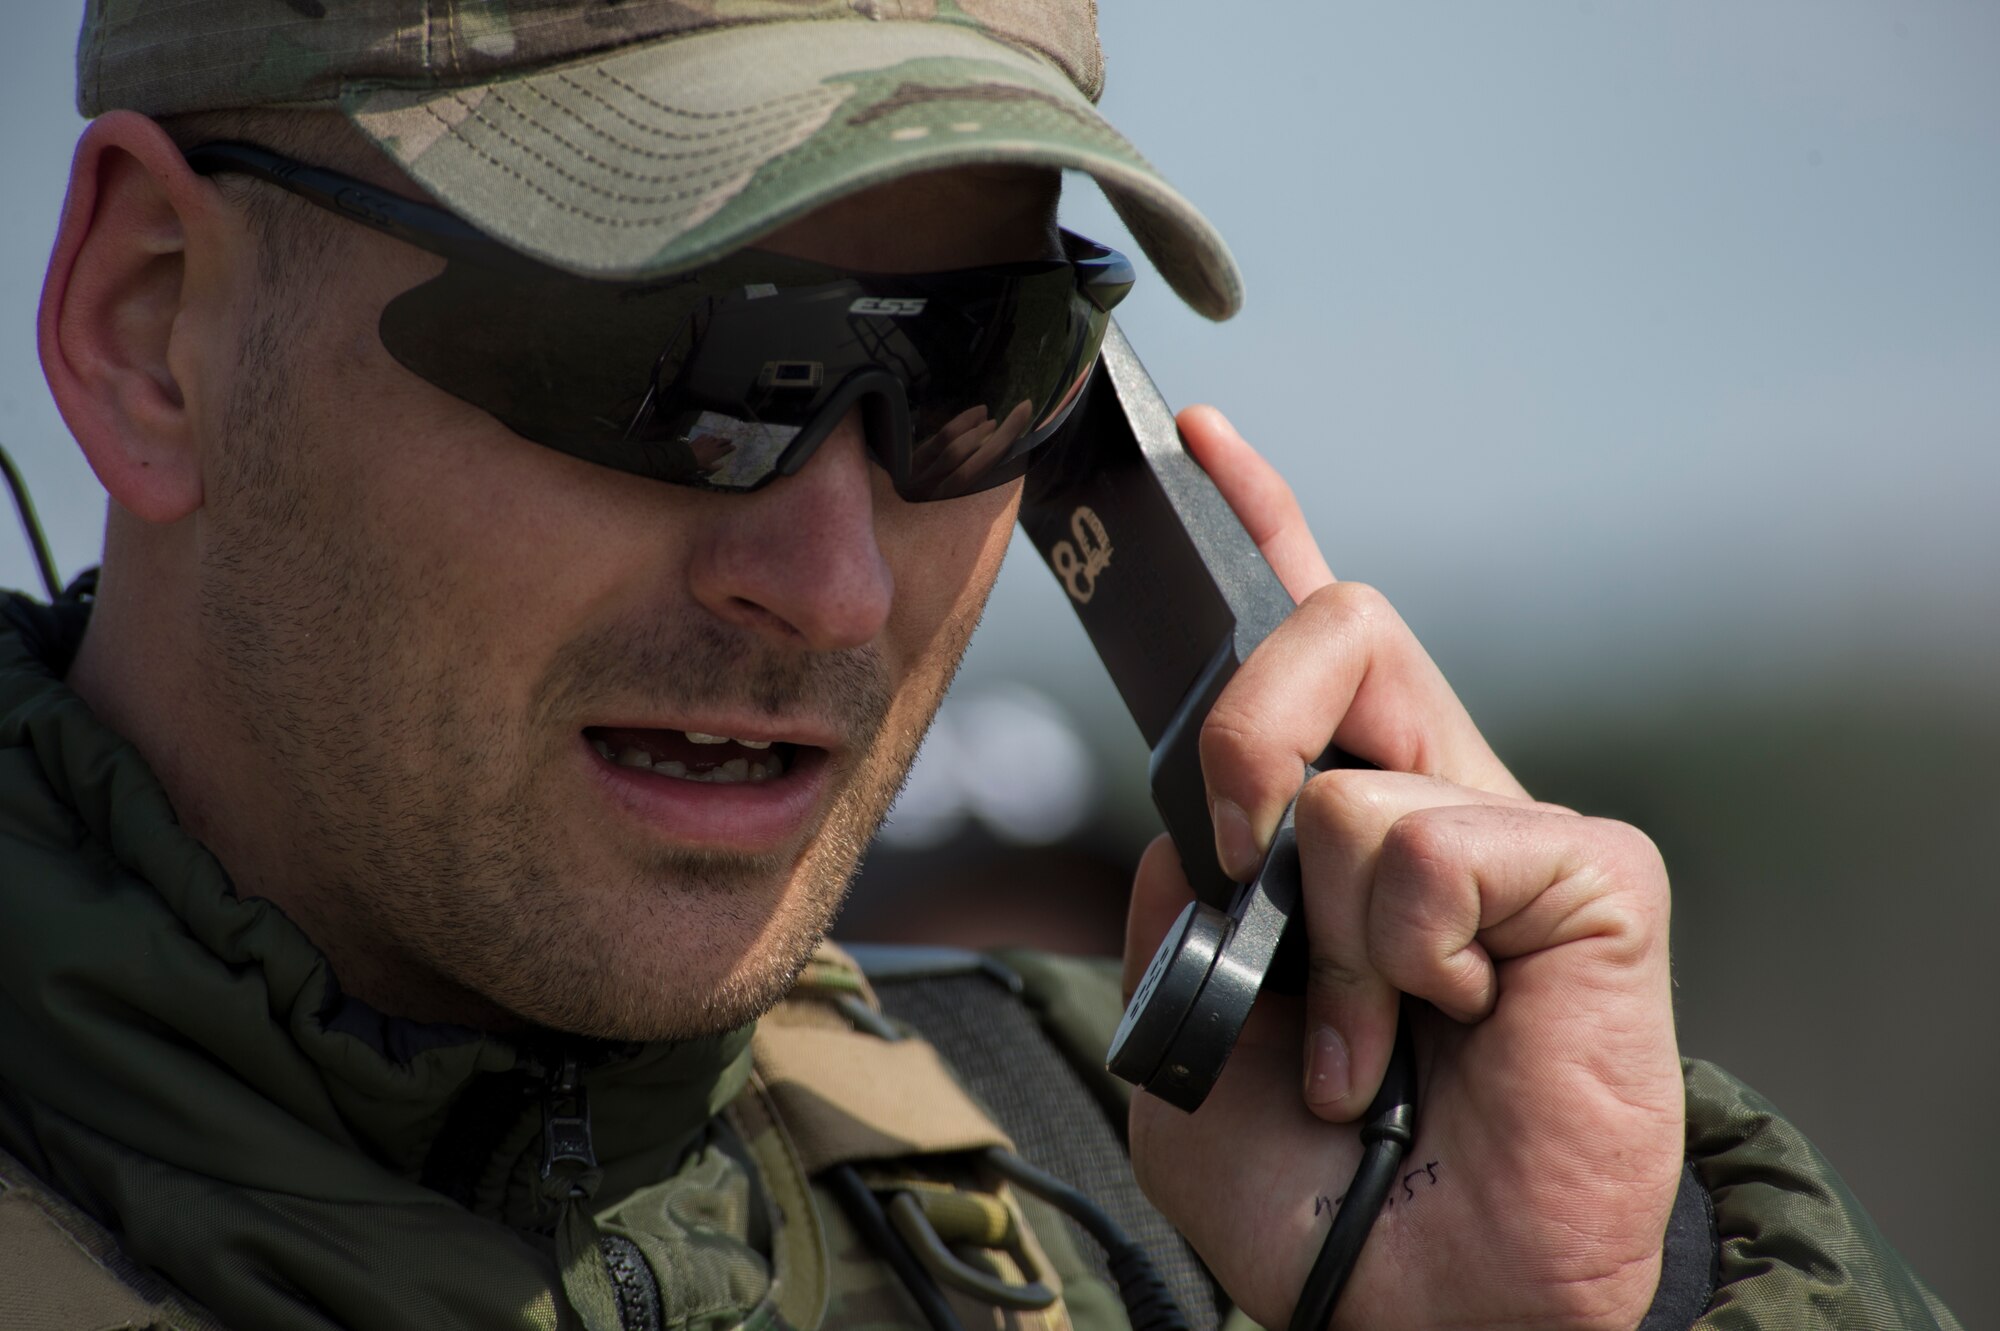 A Czech Republic air force joint terminal attack controller calls in coordinates for close air support to nearby patrolling U.S. Air Force A-10 Thunderbolt II attack aircraft assigned to the 354th Expeditionary Fighter Squadron during a theater security package deployment at Namest Air Base, Czech Republic, April 14, 2015. The U.S. Air Force’s forward presence in Europe allows cooperation among NATO allies and partners to develop and improve ready air forces capable of maintaining regional security. (U.S. Air Force photo by Staff Sgt. Christopher Ruano/Released)